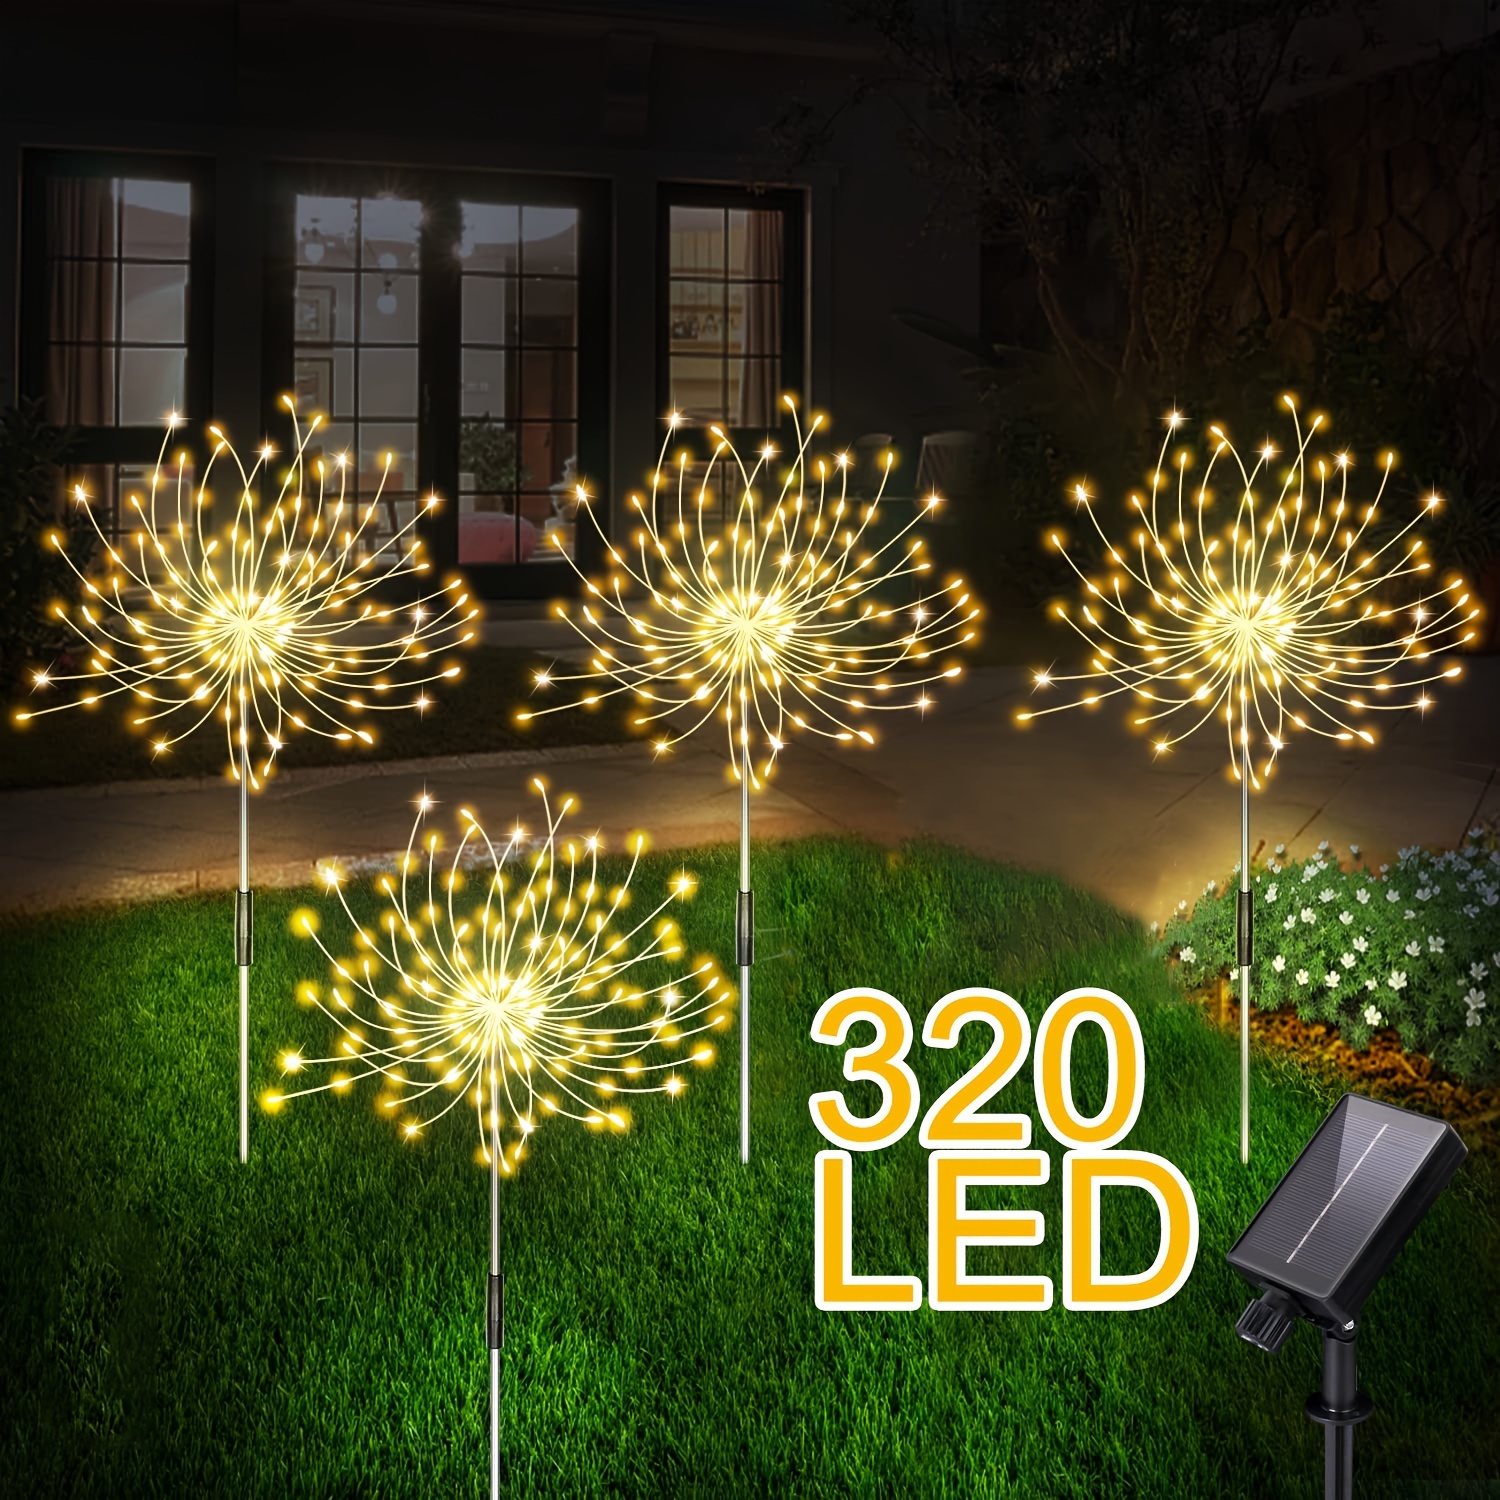 

4 Pack 320 Led , 1pack 60led Firework Lights Outdoor Solar Ip65 Waterproof Decorative Starburst Lights Landscape Lamp, Decor For Courtyard Garden Christmas Party (warm White, Multicolour)